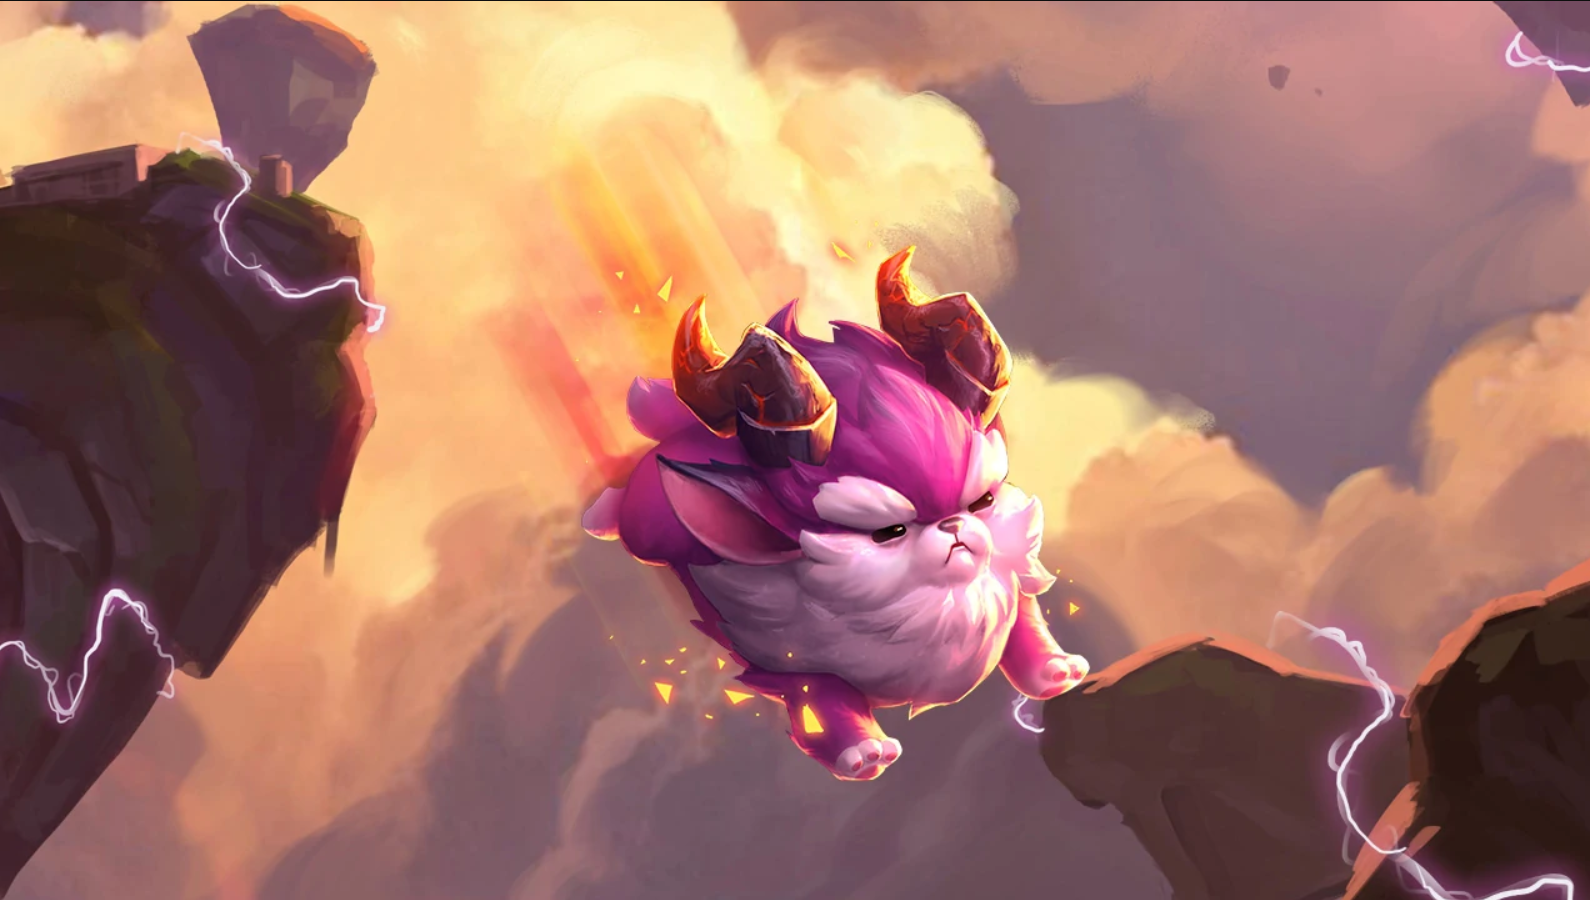 Teamfight Tactics Meta: Best Comps and Builds for TFT Set 7.5 (Patch 12.22)